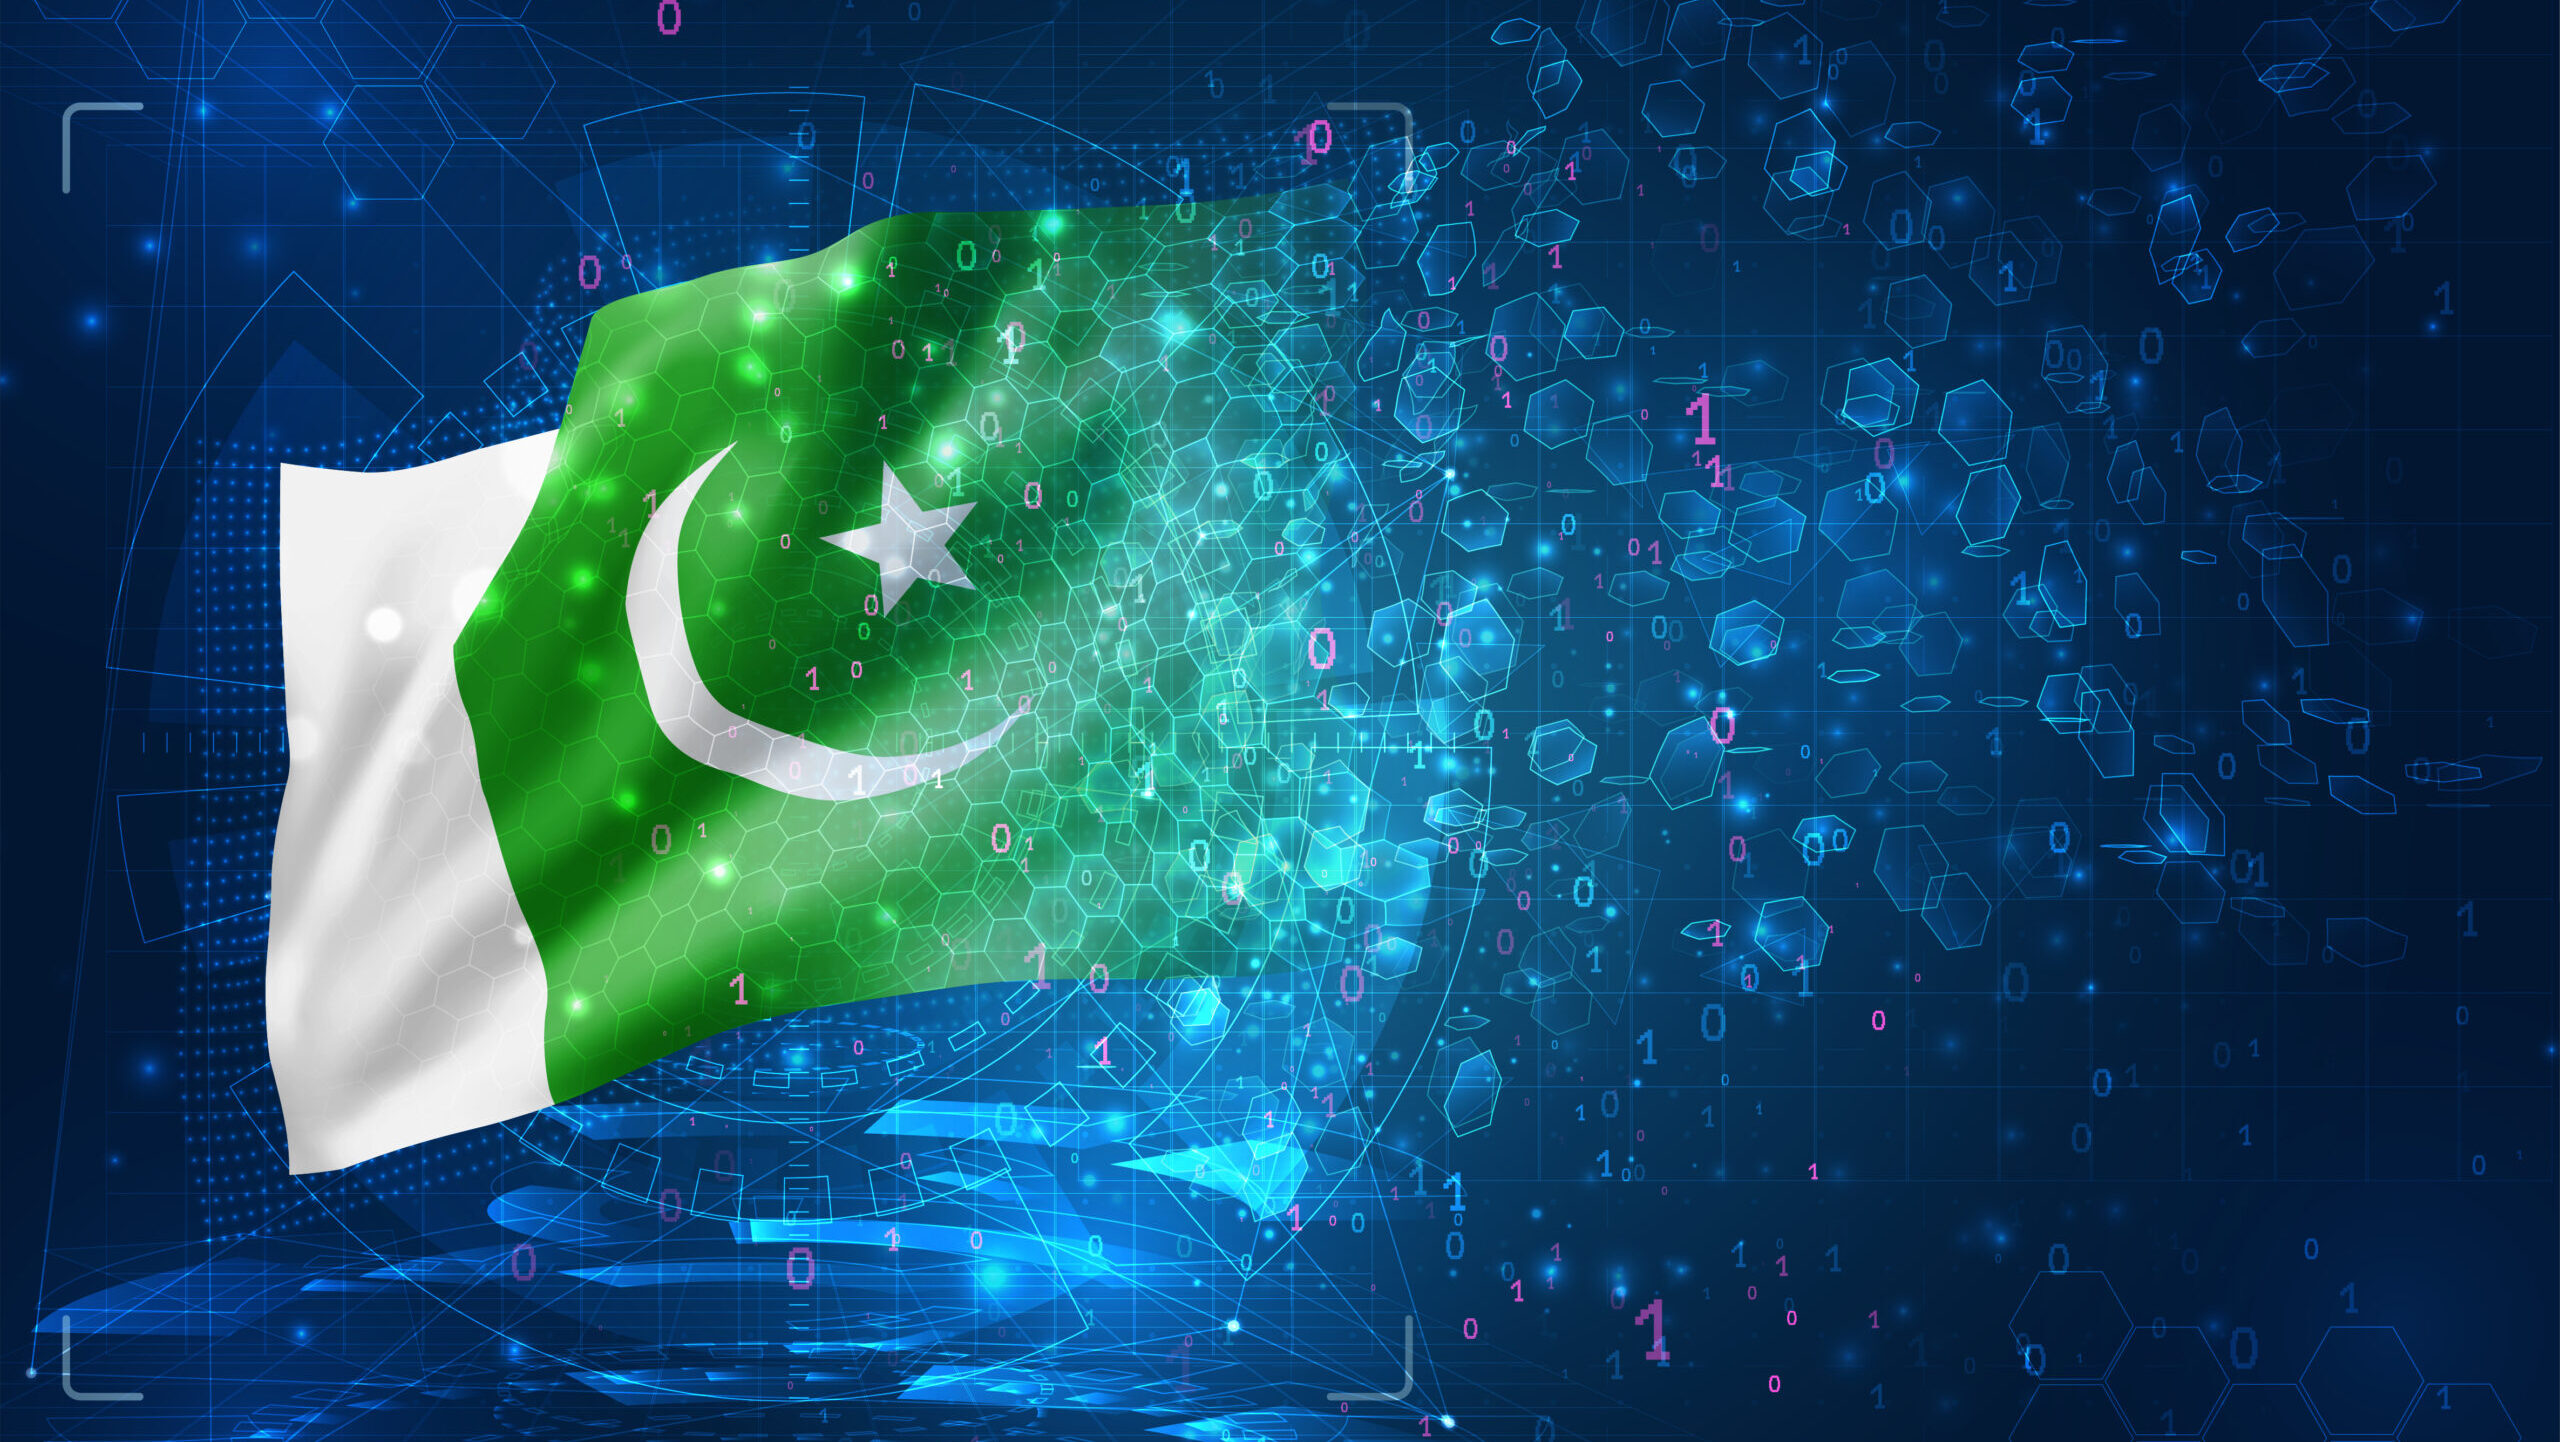 Pakistan To Implement National Firewall, Cracking Down on Online Dissent